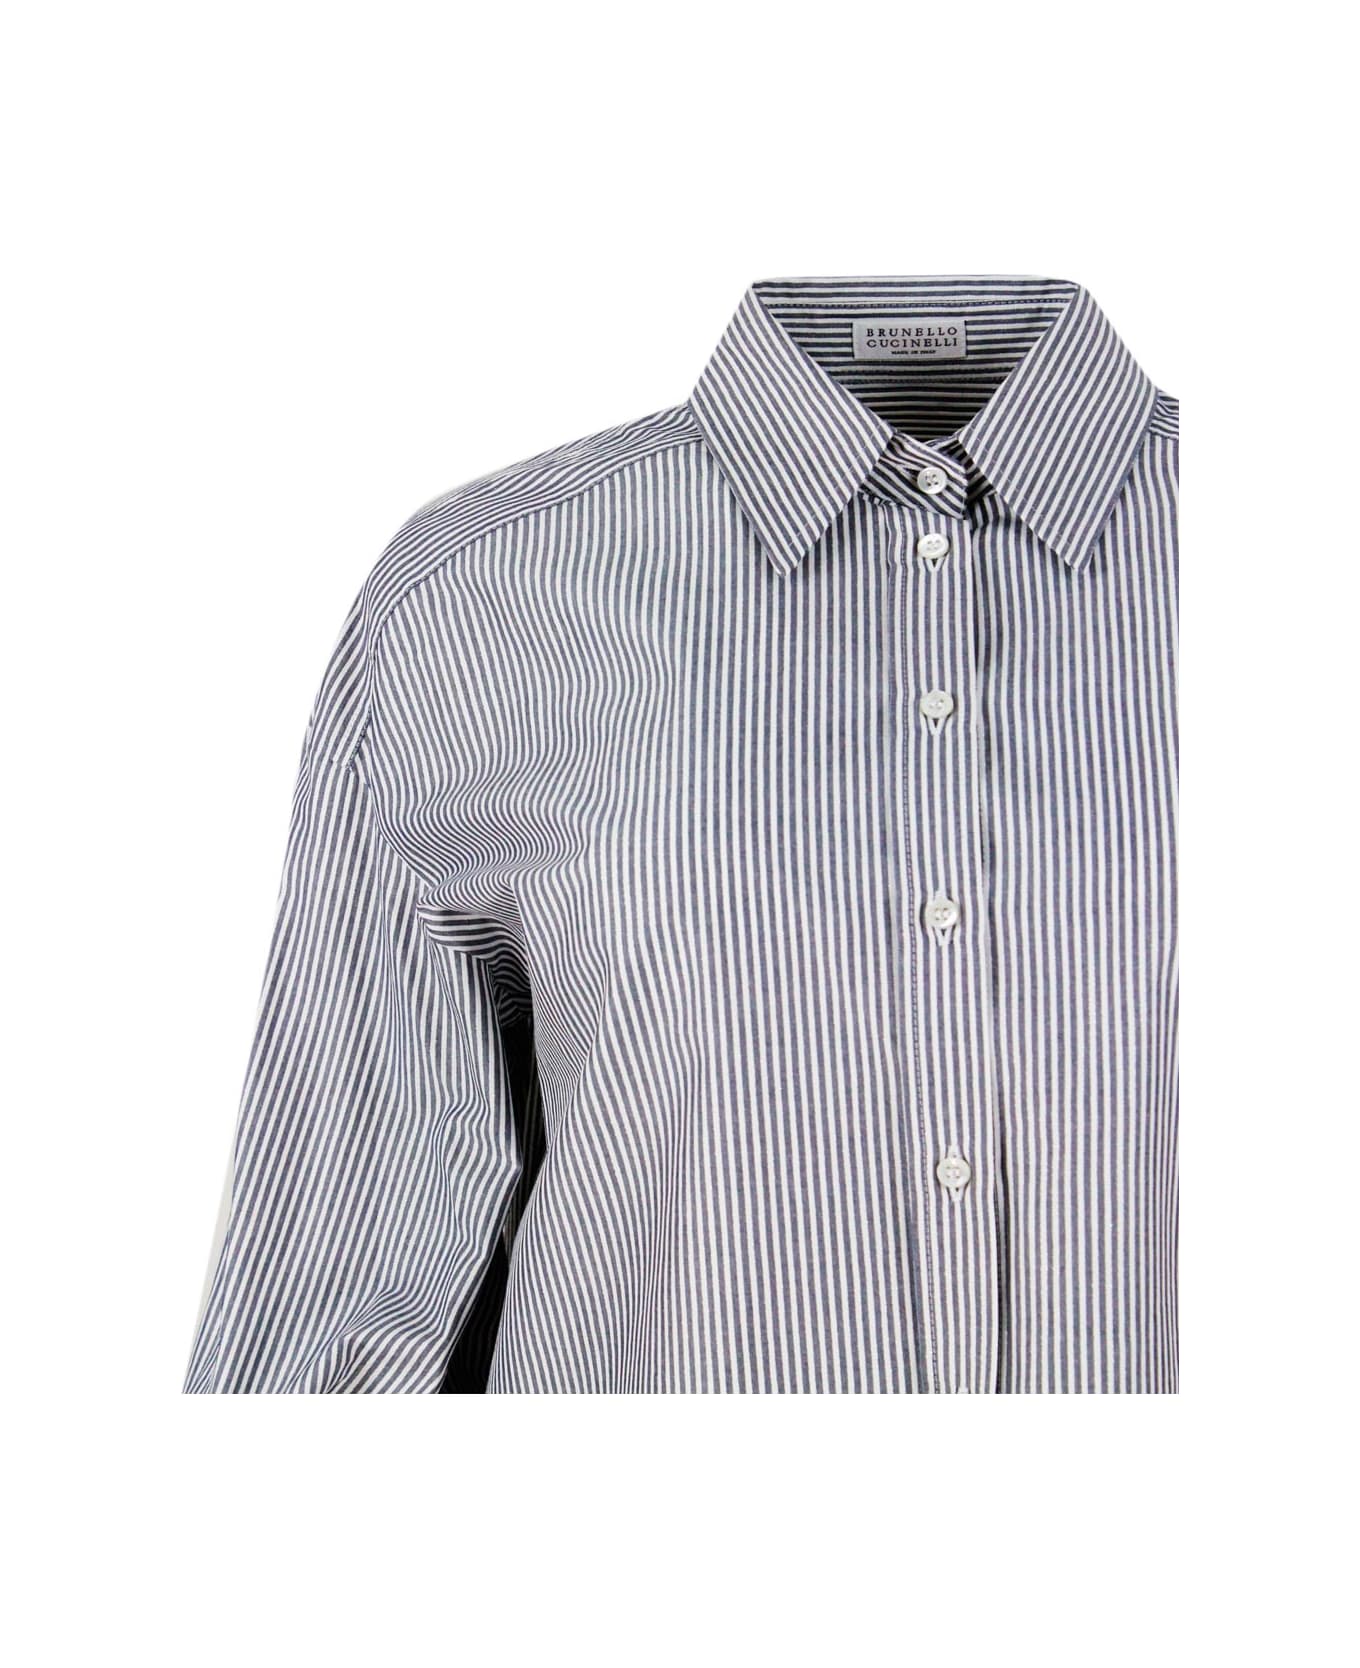 Brunello Cucinelli Long-sleeved Shirt Made Of Cotton With A Striped Pattern Embellished With Bright Lurex Threads - Blu シャツ